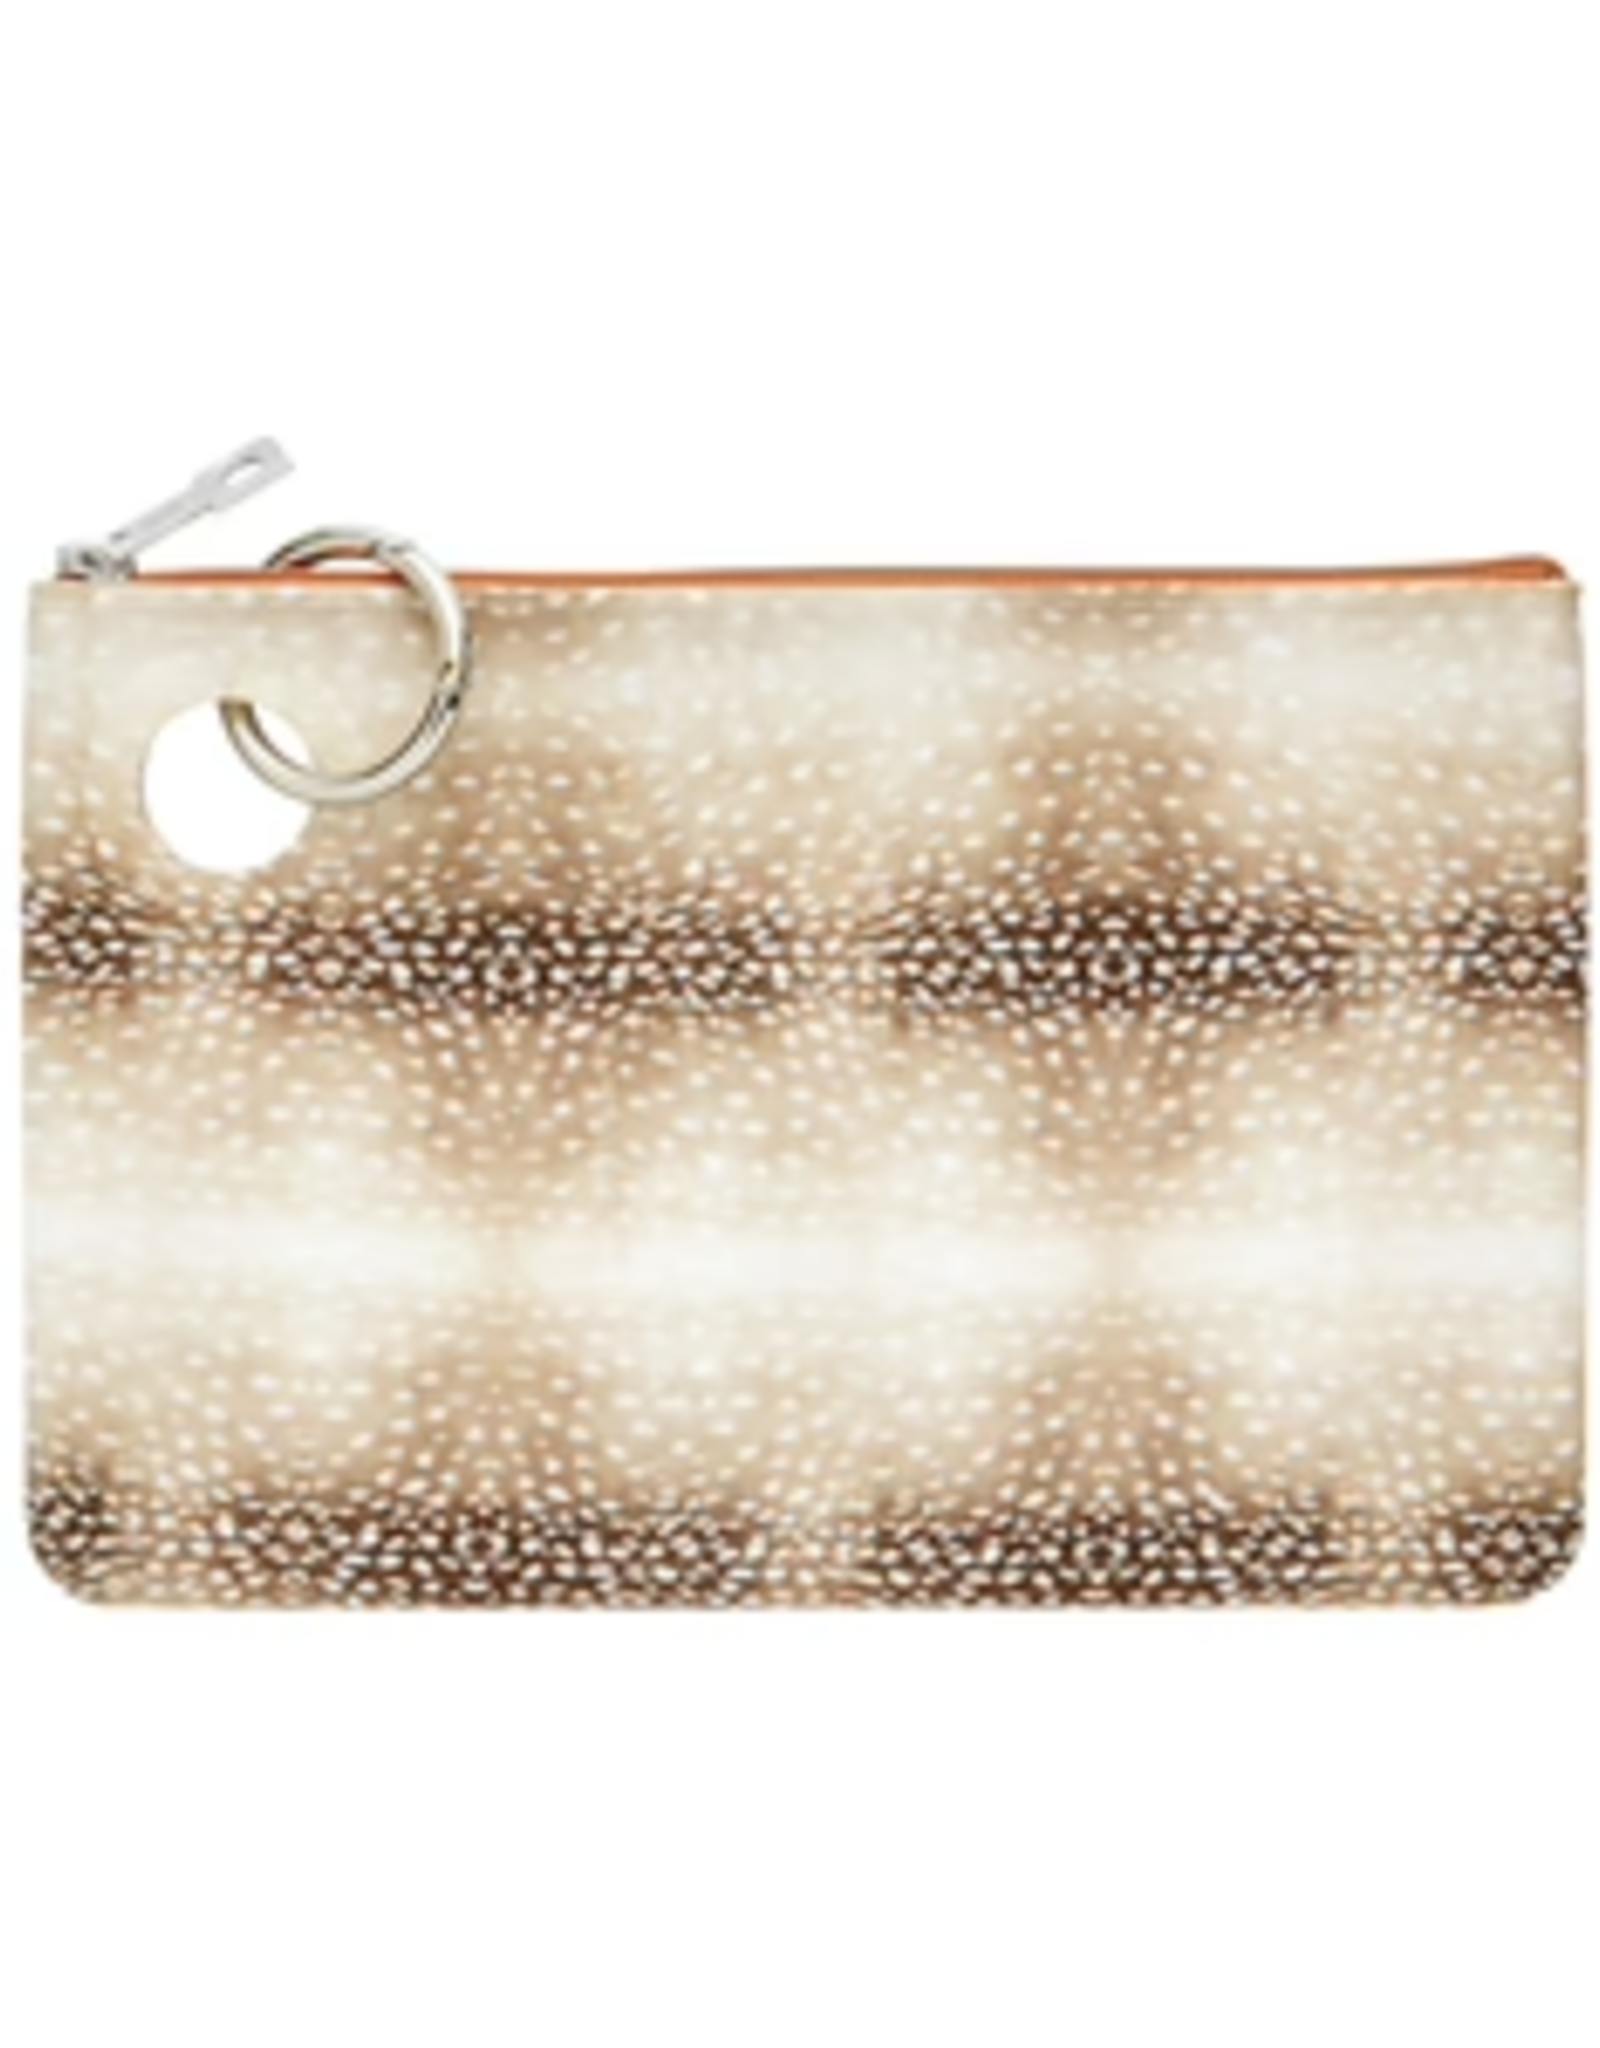 O-Venture Large Silicone Pouch in Cheetah, Groovy's